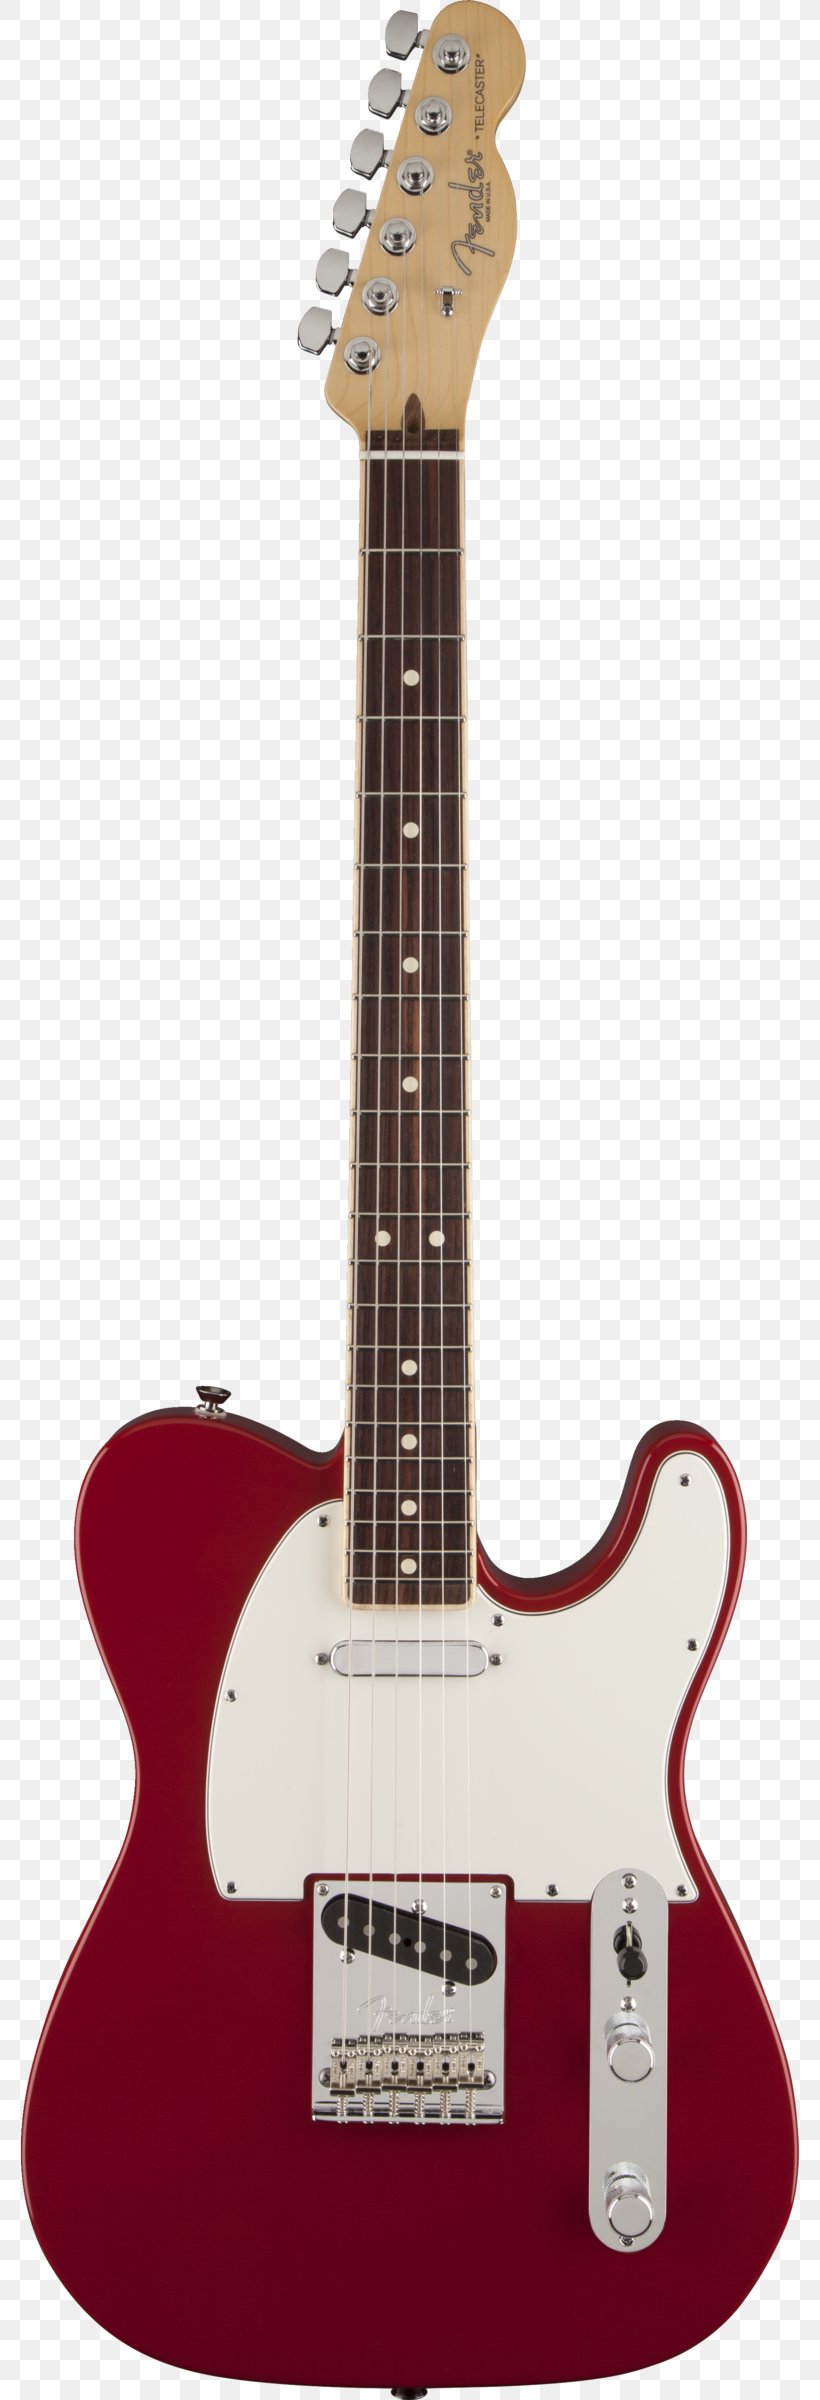 Fender Telecaster Fender Musical Instruments Corporation Electric Guitar Fender Stratocaster Squier, PNG, 778x2400px, Fender Telecaster, Acoustic Electric Guitar, Acoustic Guitar, Electric Guitar, Electronic Musical Instrument Download Free